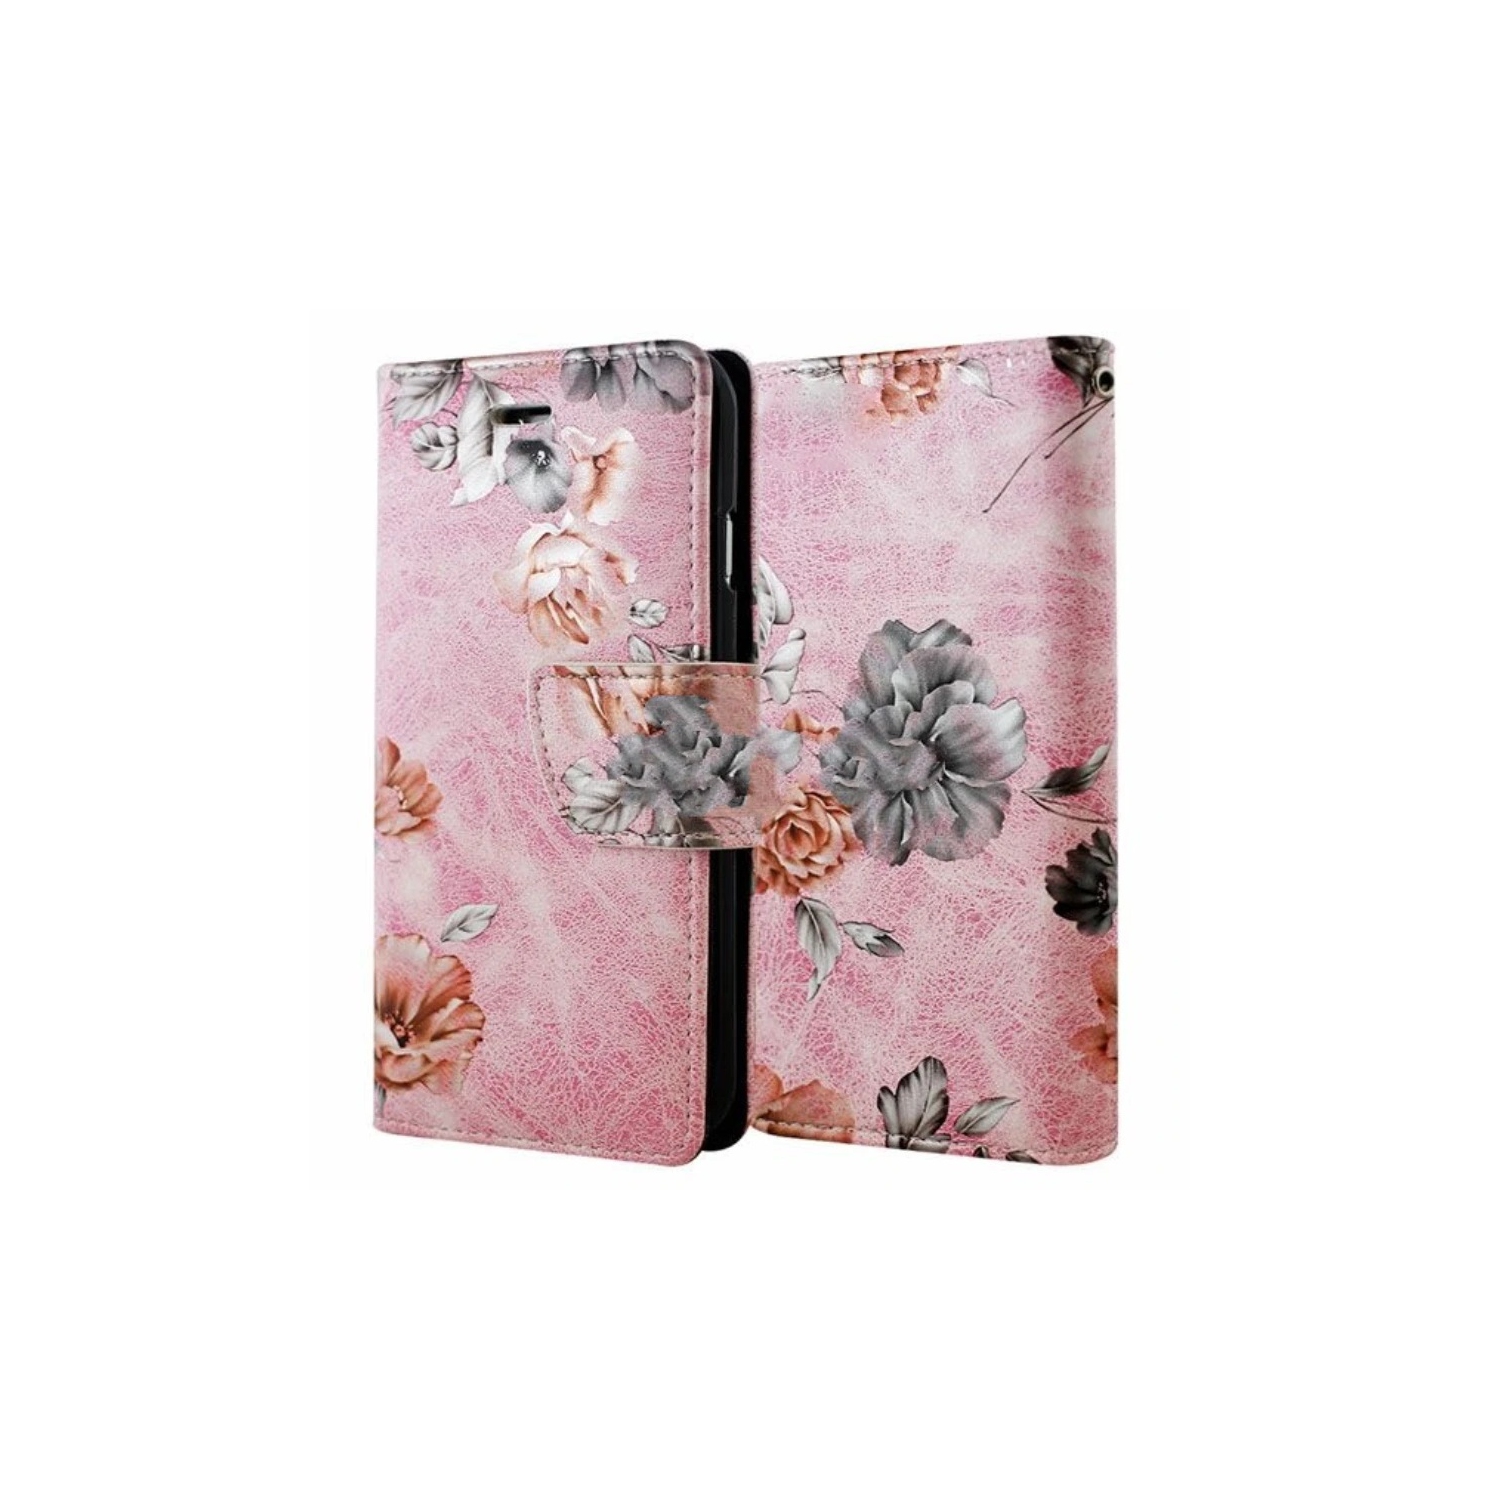 【CSmart】 Magnetic Card Slot Leather Folio Wallet Flip Case Cover for Samsung Galaxy A12 / M12 / F12, Pink Flower